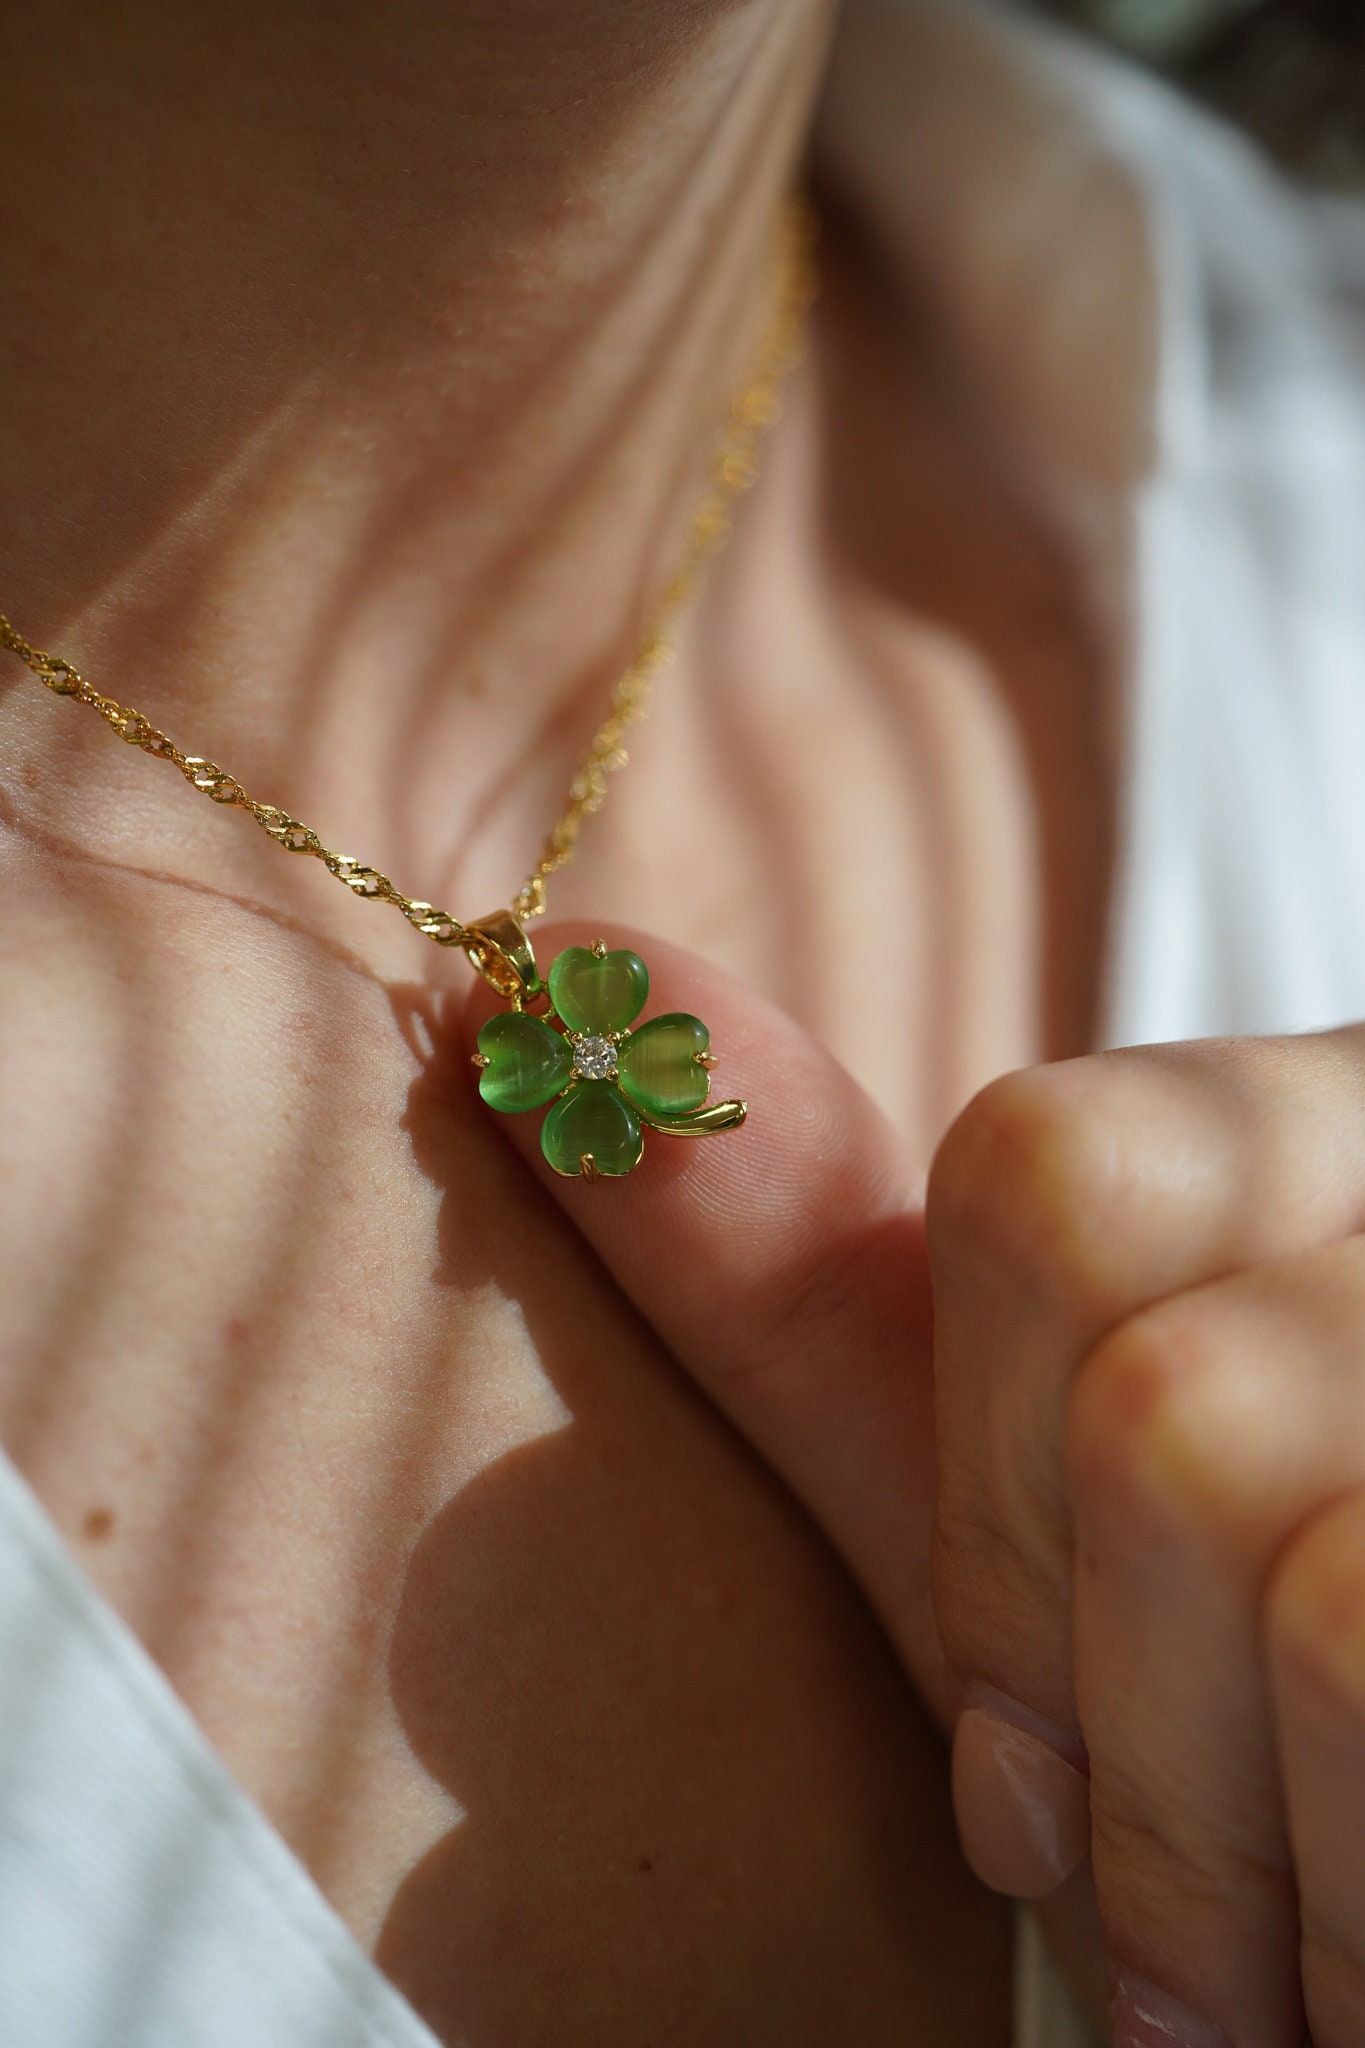 Women's Lucky Clover Floral Charms Necklace